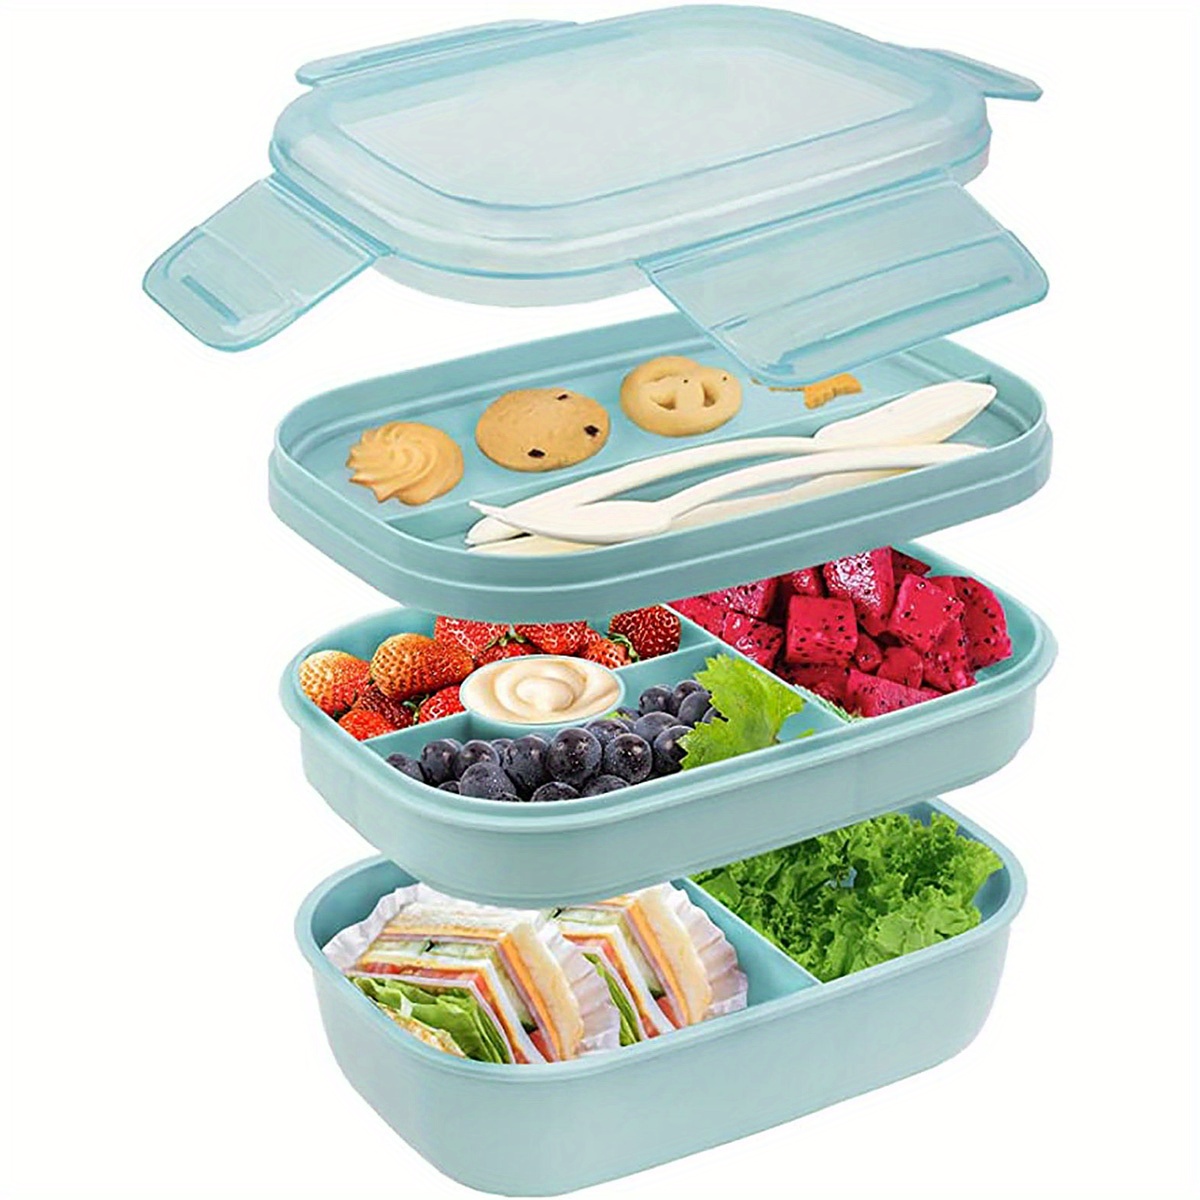 Reusable 5-Compartment Food Containers for School, Work, and